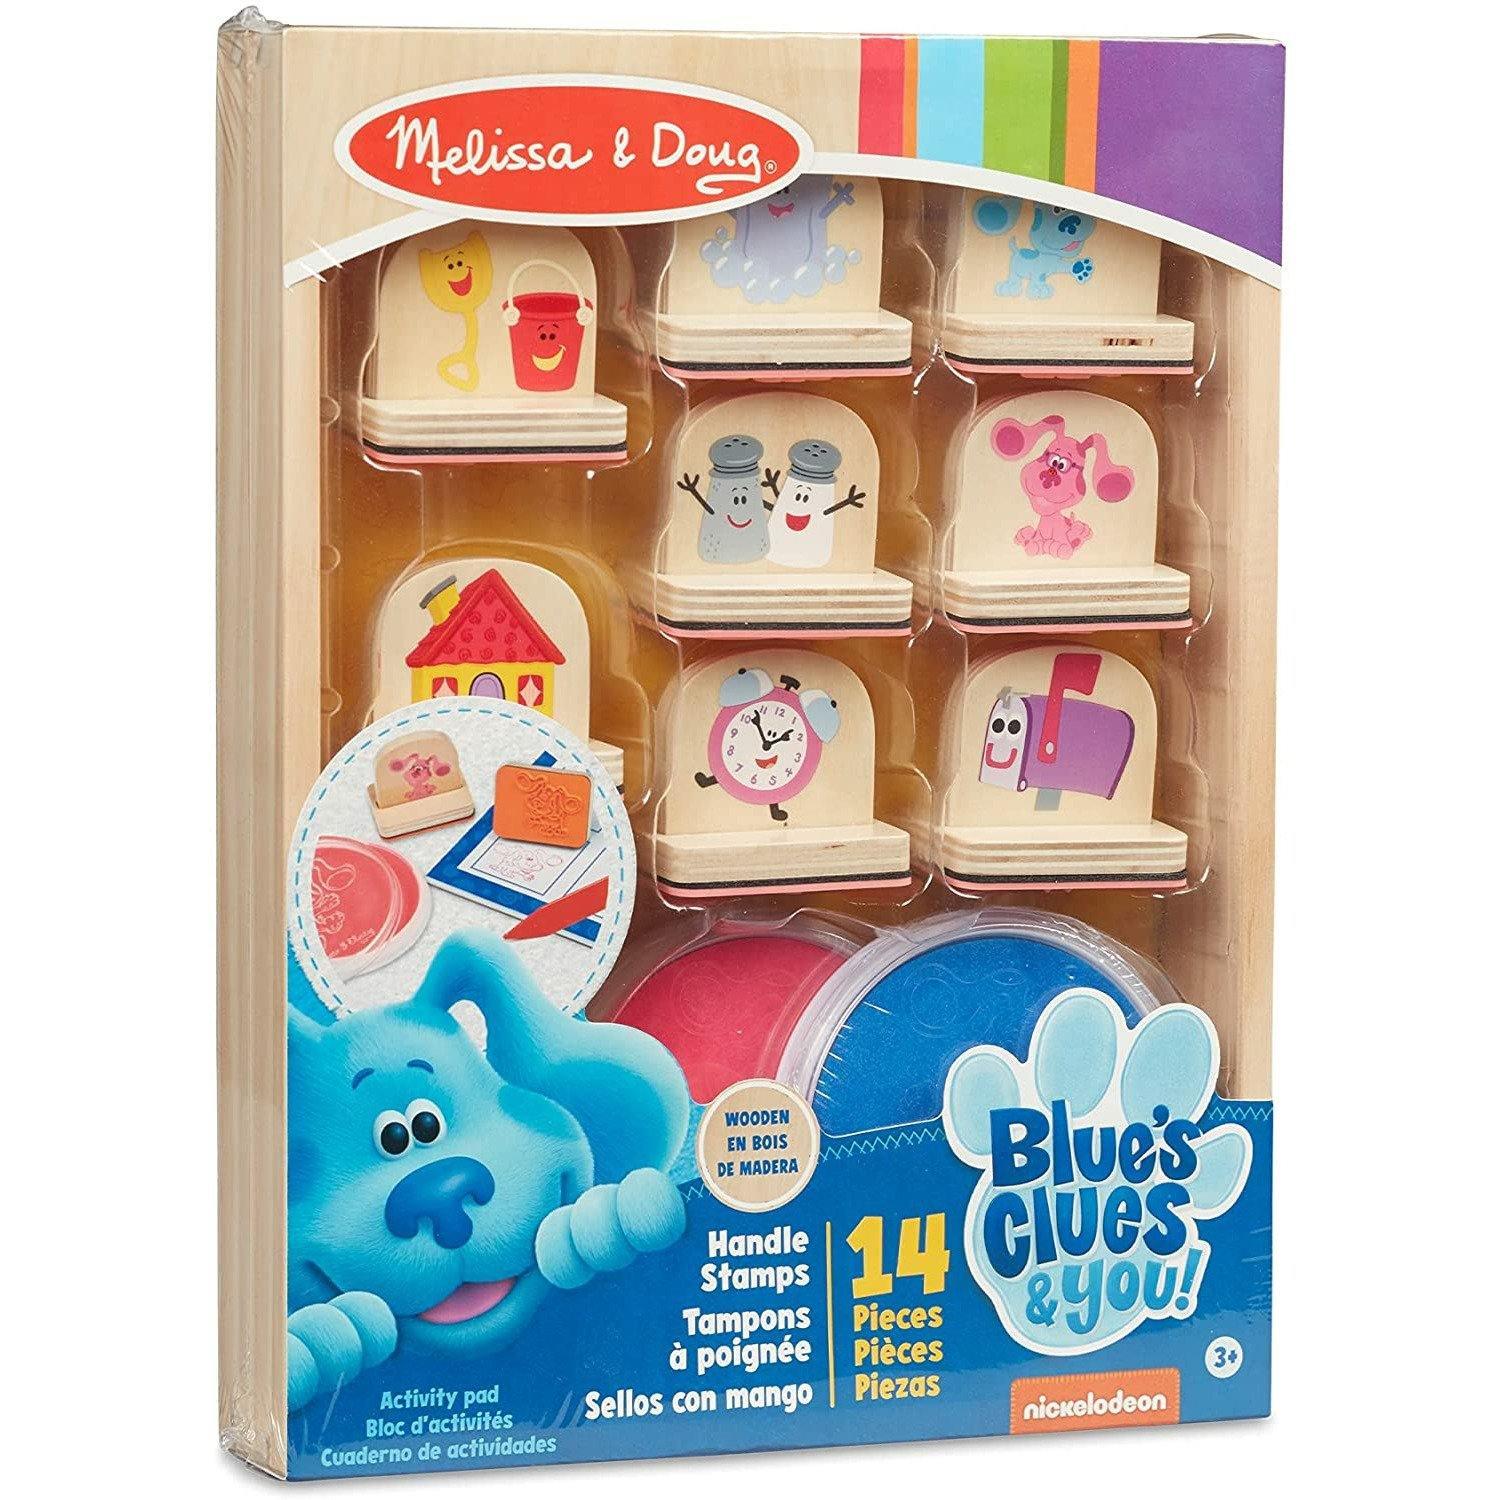 Melissa & Doug Blue's Clues & You! Wooden Handle Stamps and Activity Pad (15 Pieces) - BumbleToys - 4, 4+ Years, Blackboards & Easels, Boys, Girls, OXE, Stationery & Stickers